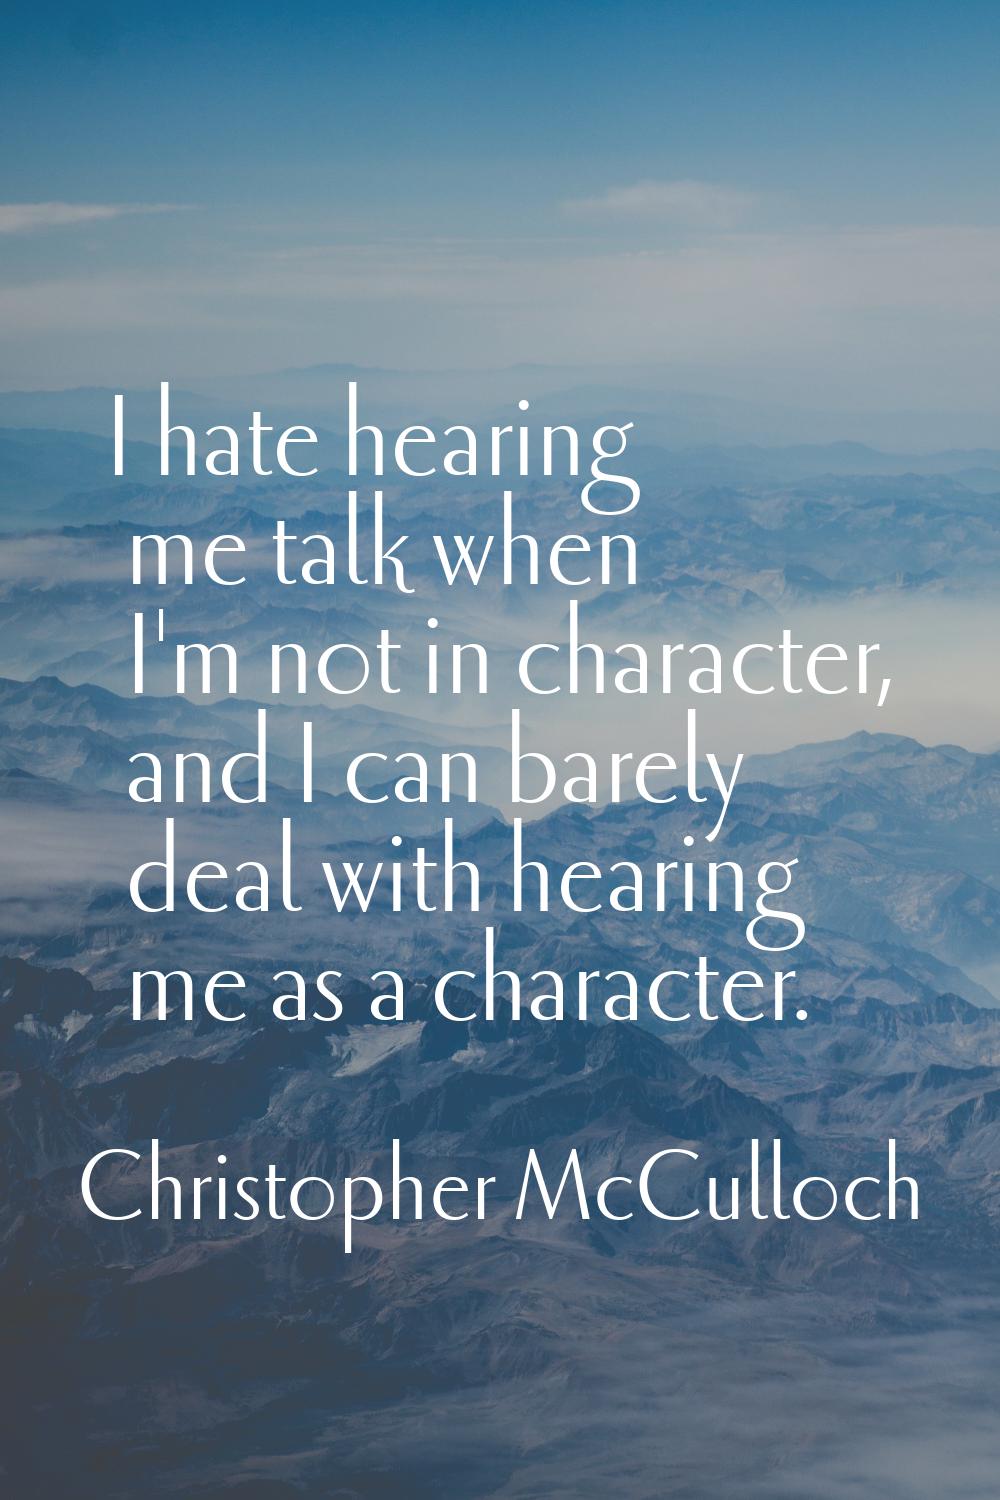 I hate hearing me talk when I'm not in character, and I can barely deal with hearing me as a charac